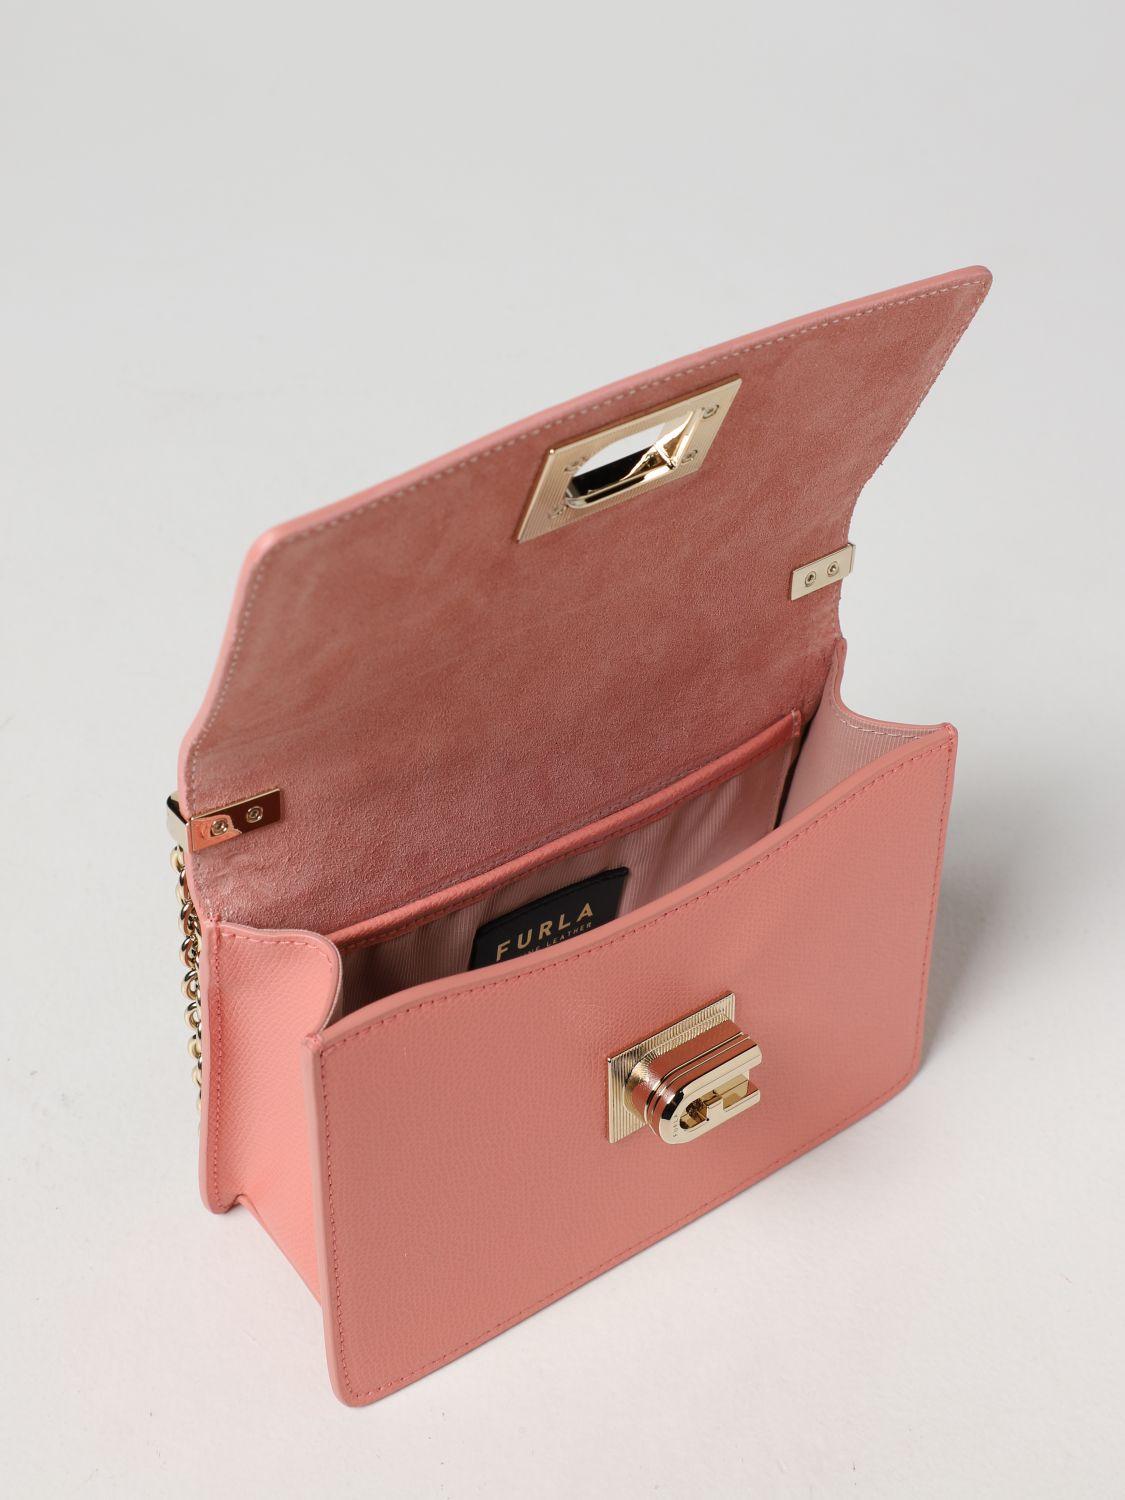 Furla 1927 Bag In Micro-grained Leather in Pink | Lyst